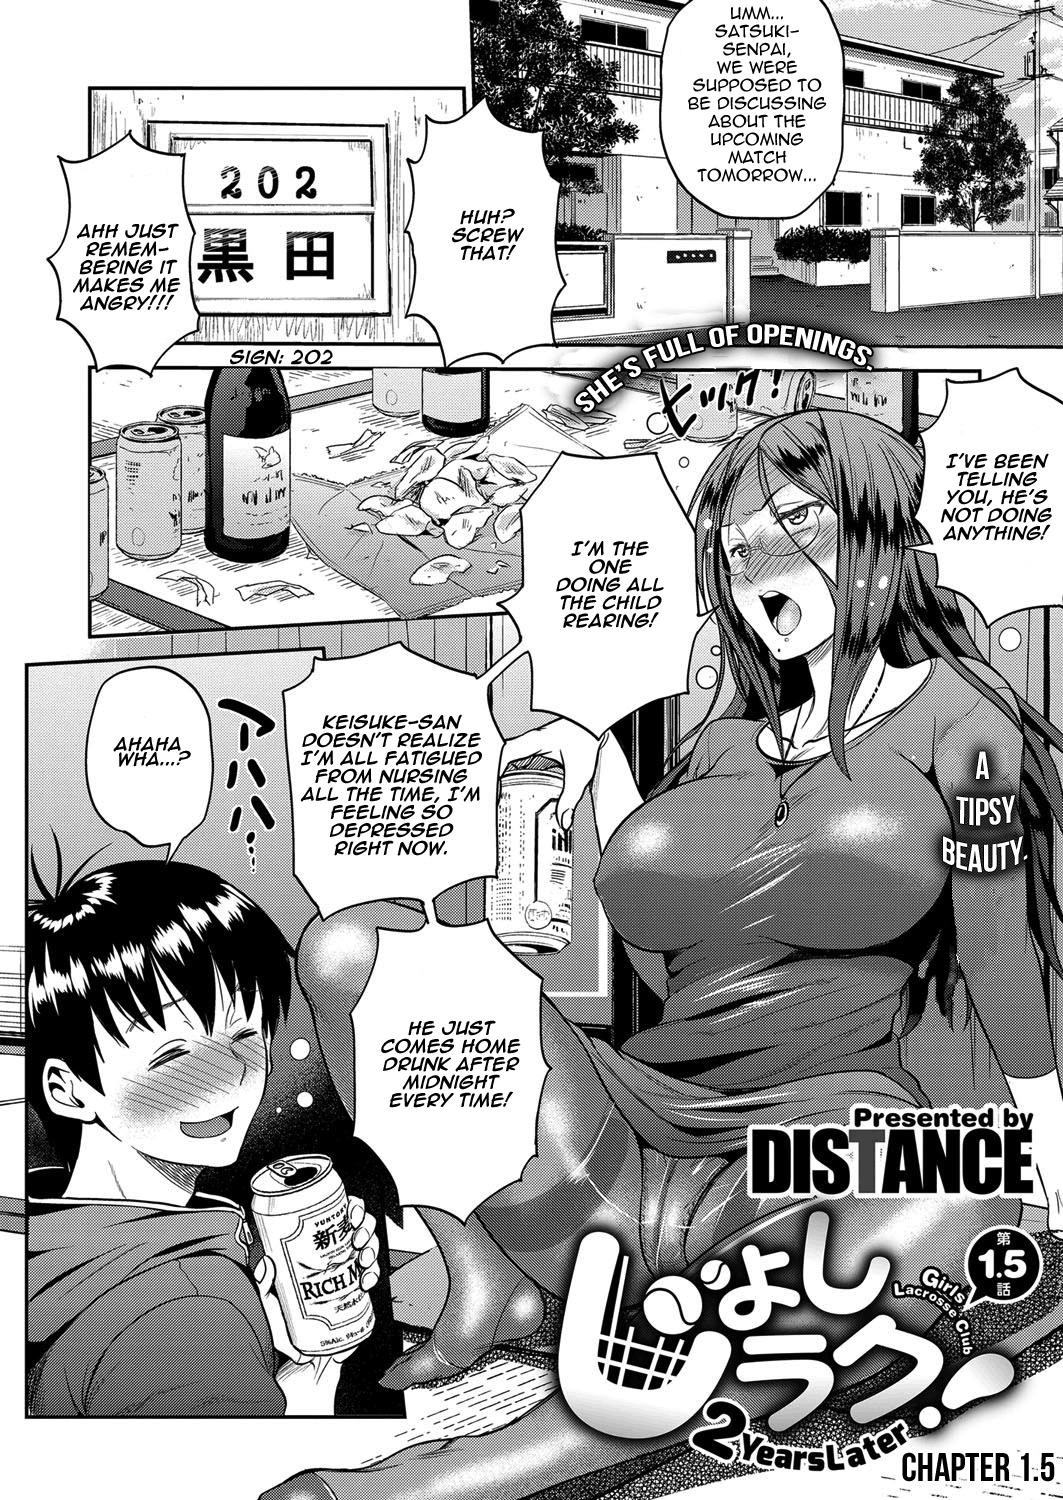 [DISTANCE] Joshi Lacu! - Girls Lacrosse Club ~2 Years Later~ Ch. 1.5 (COMIC ExE 06) [English] [TripleSevenScans] [Digital] 3